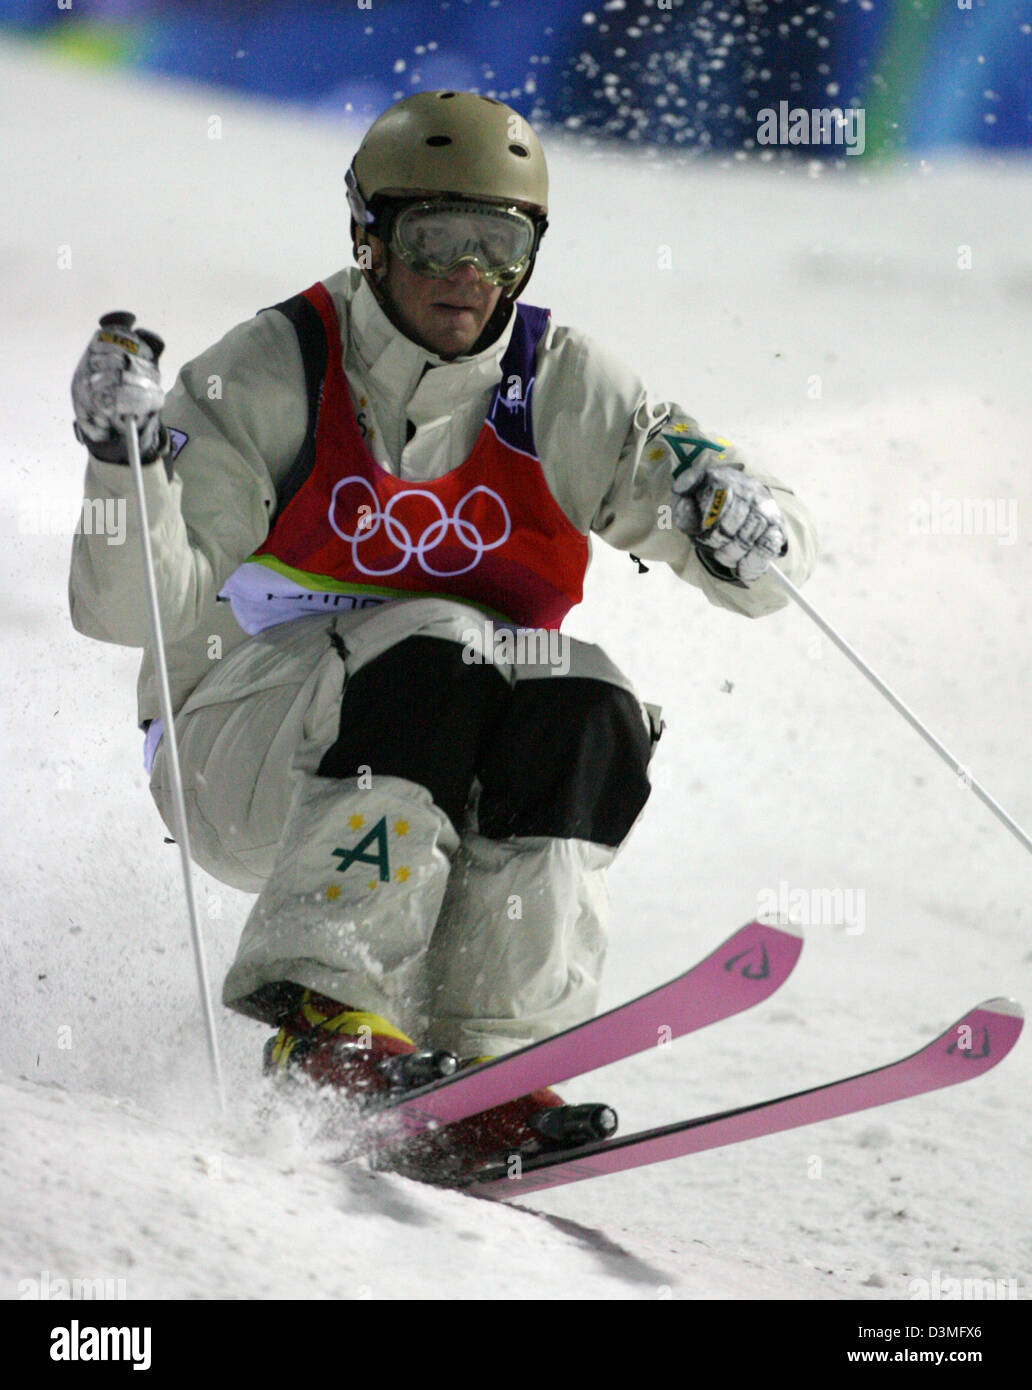 Australian freestyle skier Dale Begg-Smith pictured on the mogul piste in Sauze d'Oulx near Turin, Italy, 15 February 2006. Ronkainen won the Freestyle Skiing Men's Mogul claiming gold. Photo: Martin Schutt Stock Photo